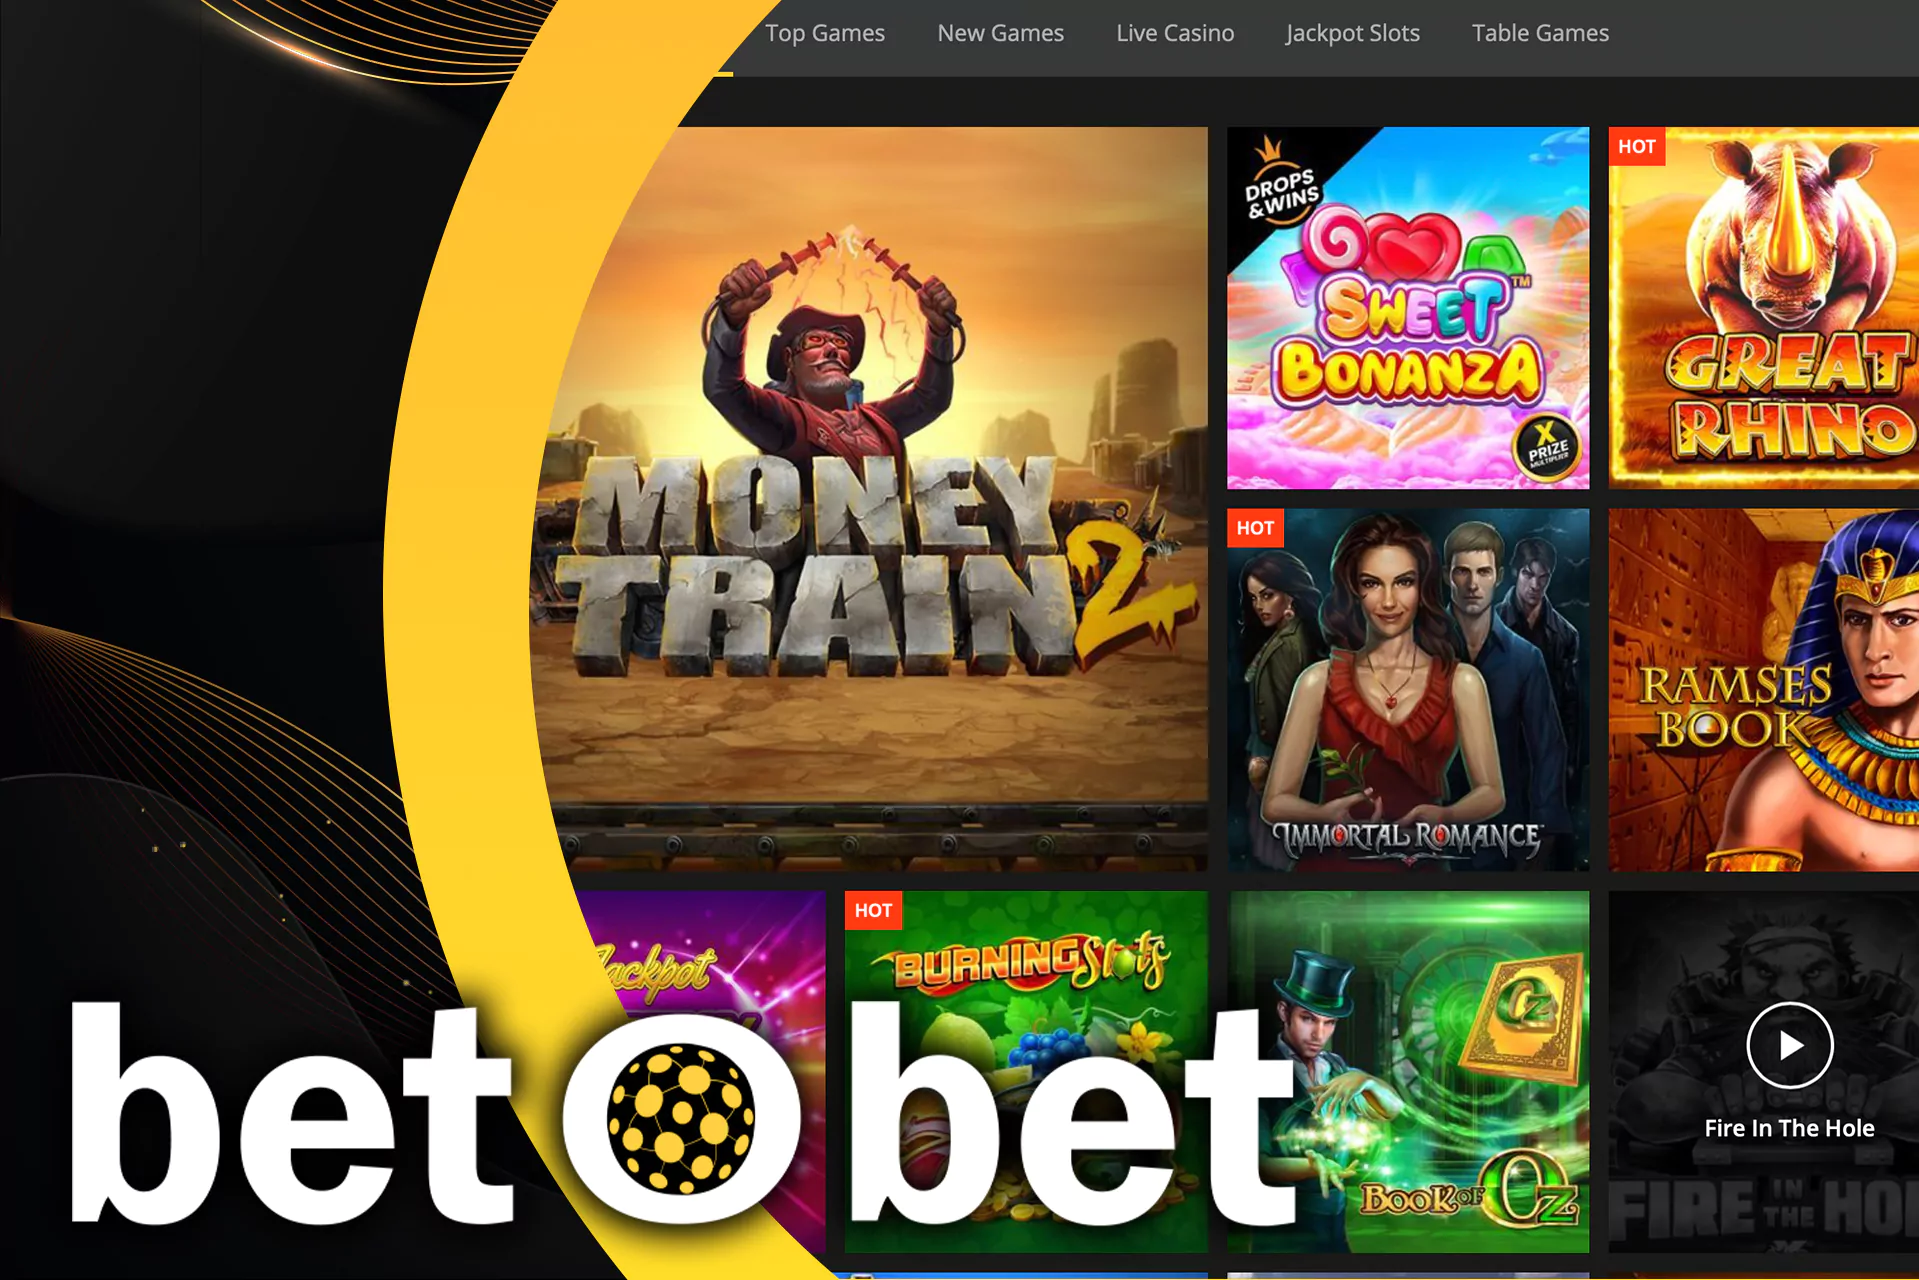 There are a lot of slots for playing at Bet O Bet,